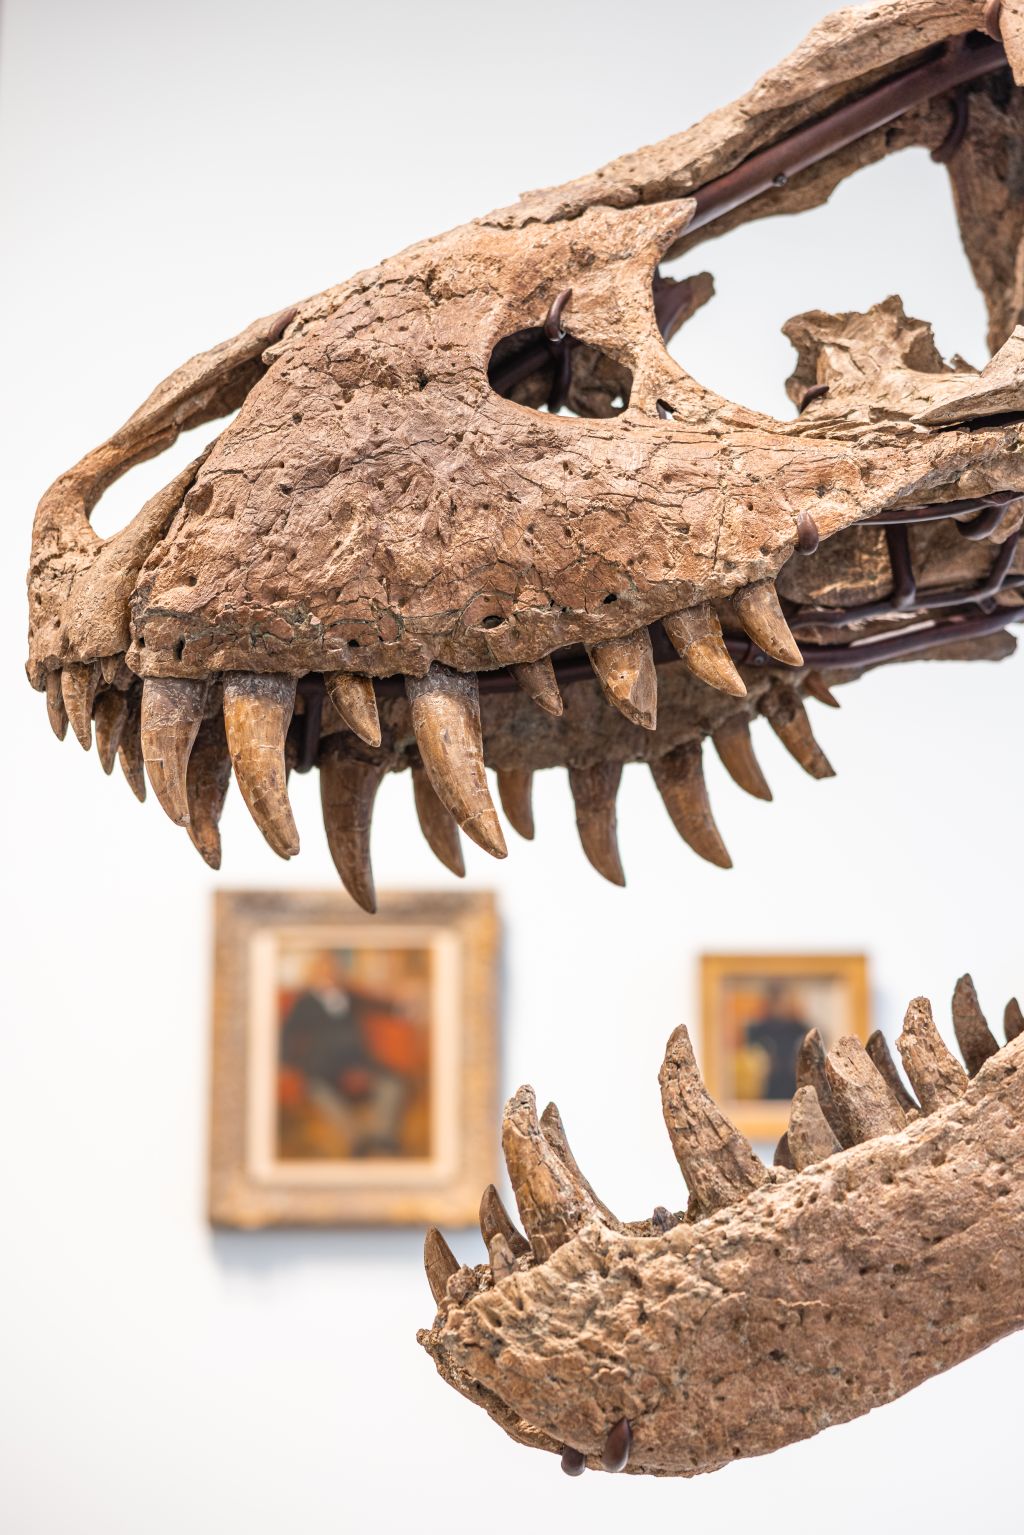 T. rex skull expected to sell for $15 million at auction